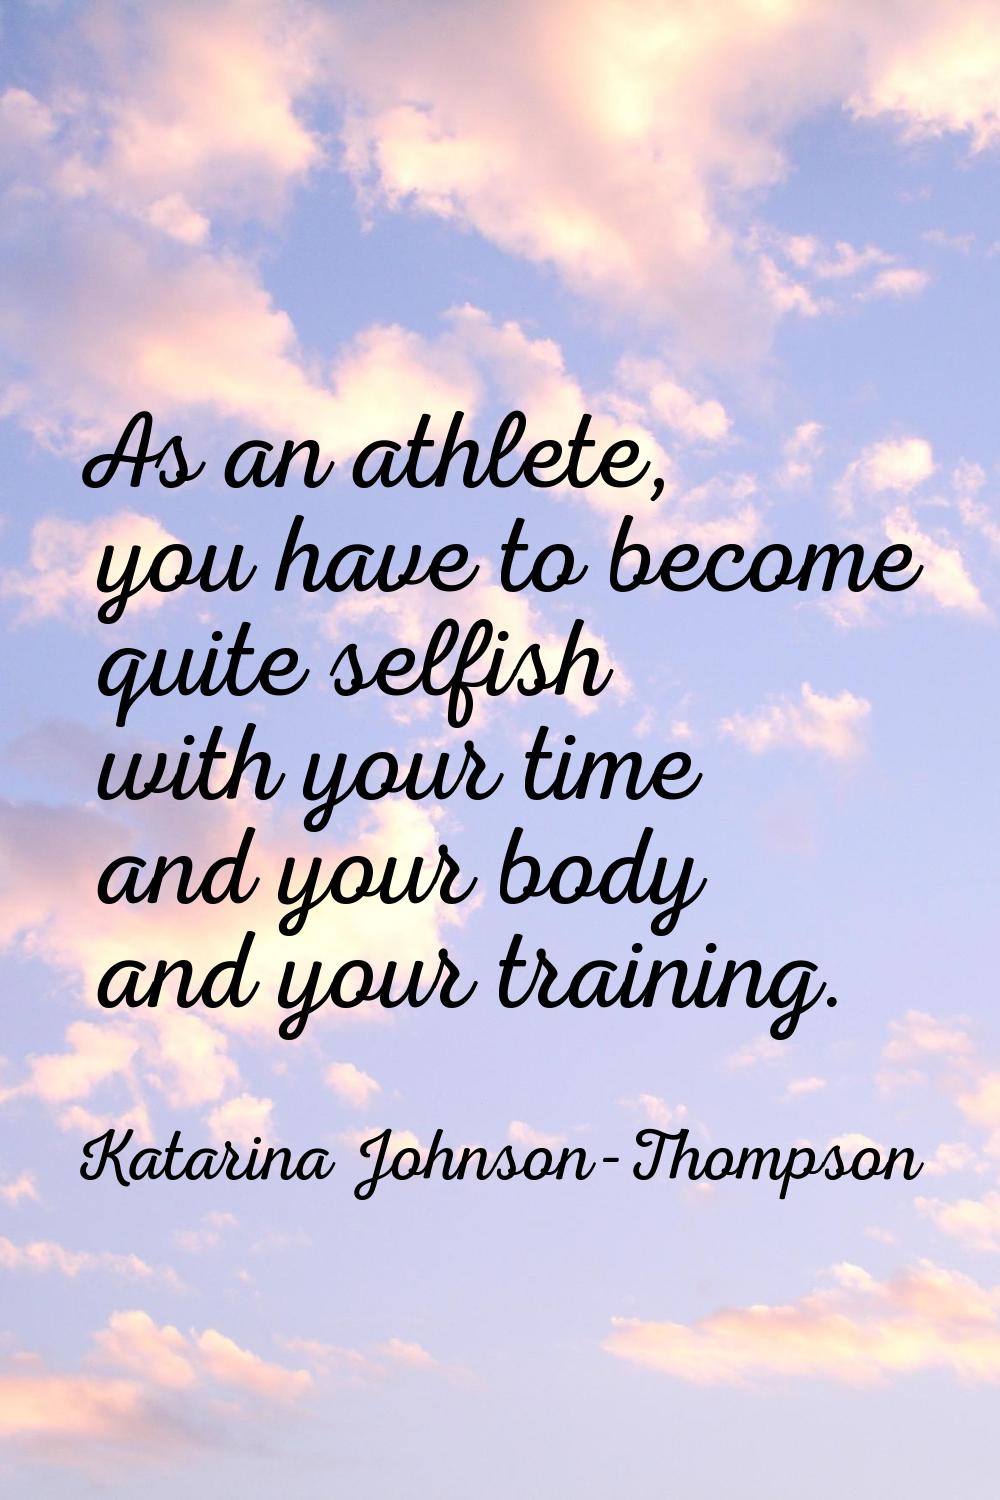 As an athlete, you have to become quite selfish with your time and your body and your training.